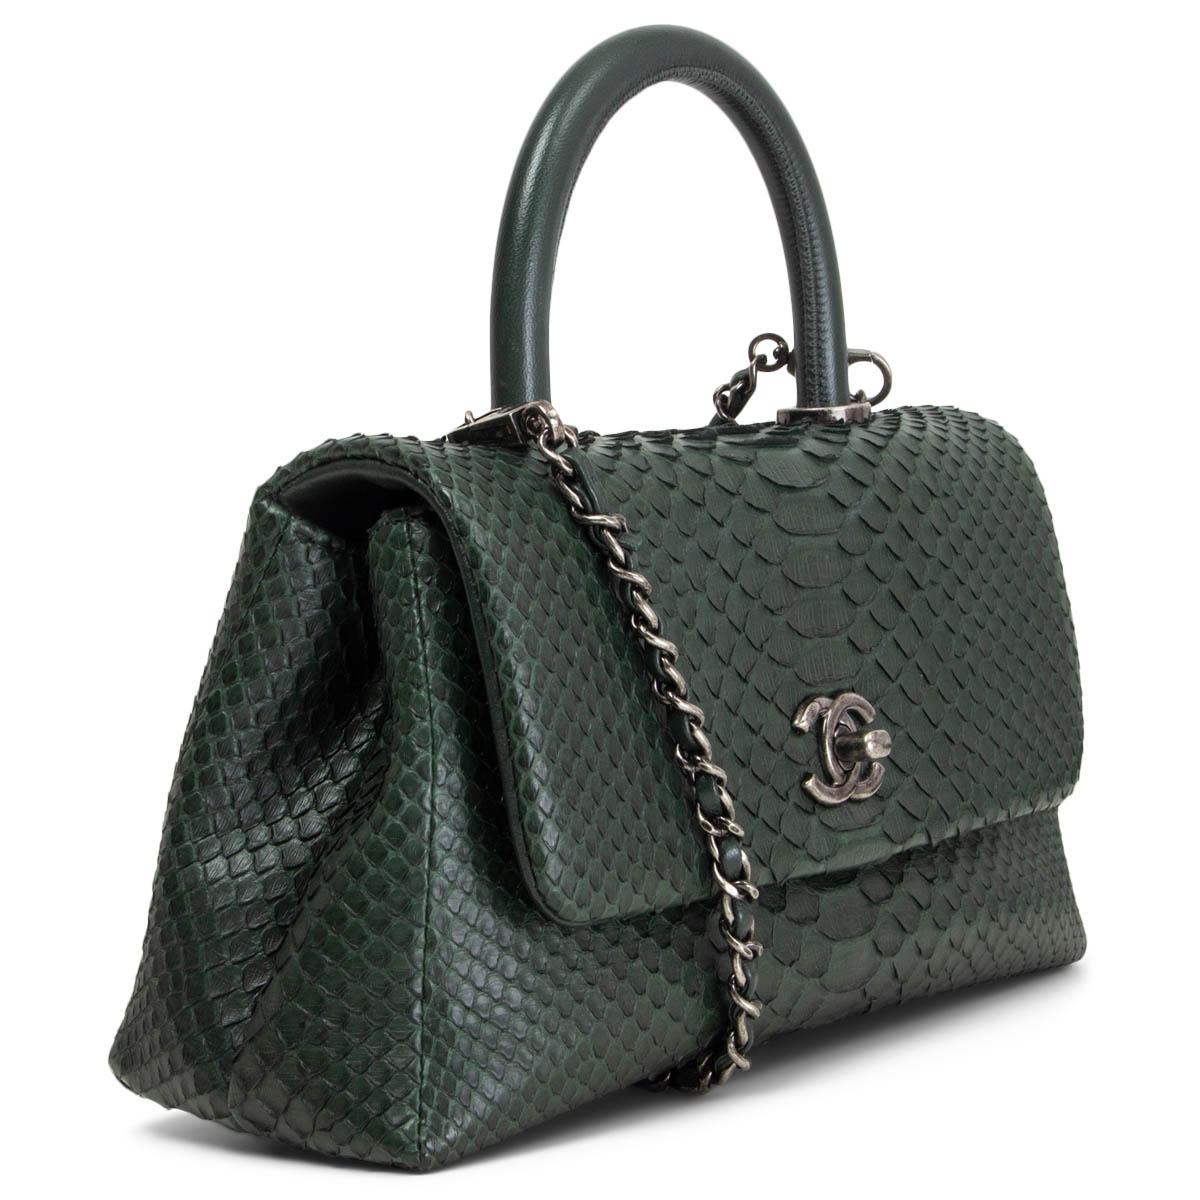 100% authentic Chanel 2016 Coco Handle Small Flap bag in dark green python. Opens with a gunmetal CC turn-lock to a dark green lambskin lined interior with one zip pocket against th back and one open pocket in the middle. Comes with a detachable